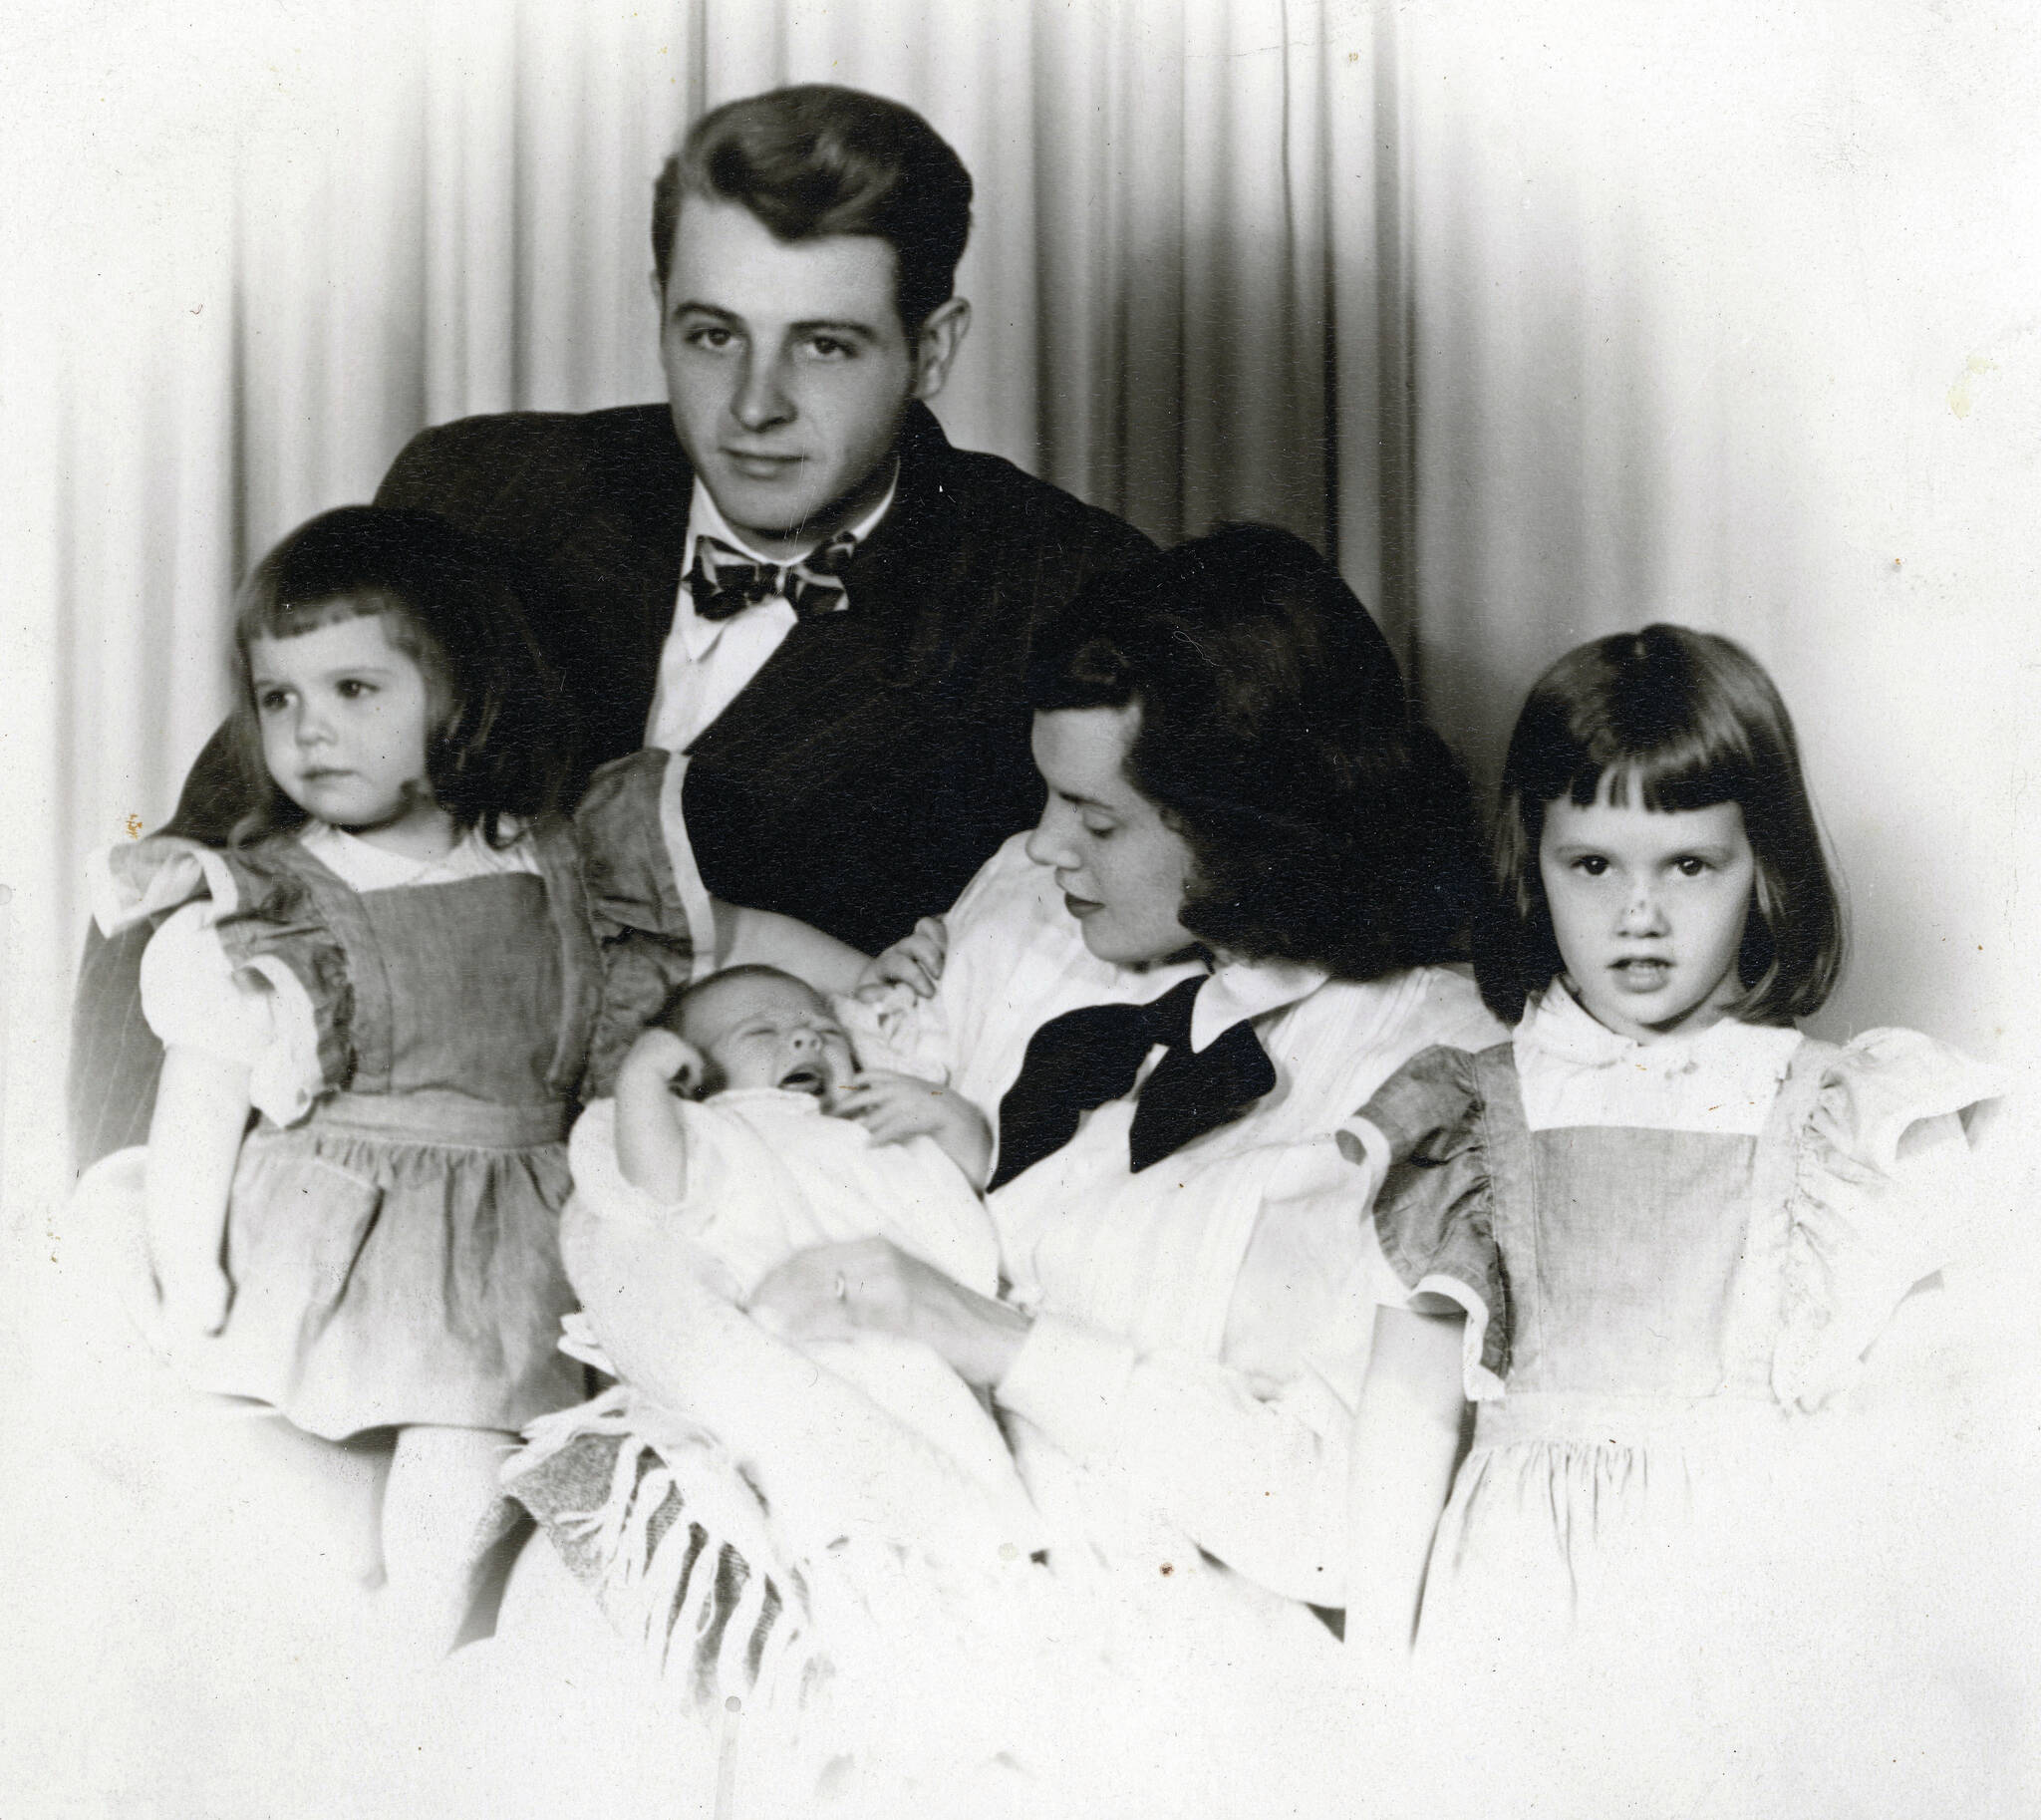 Larry and Rusty Lancashire pose for a formal portrait late fall 1947 with their young family prior to moving to Alaska. Middle daughter Lori is at left, and eldest daughter Martha is at right. In Rusty’s arms is newborn Abby. (Photo courtesy of the Lancashire Family Collection)